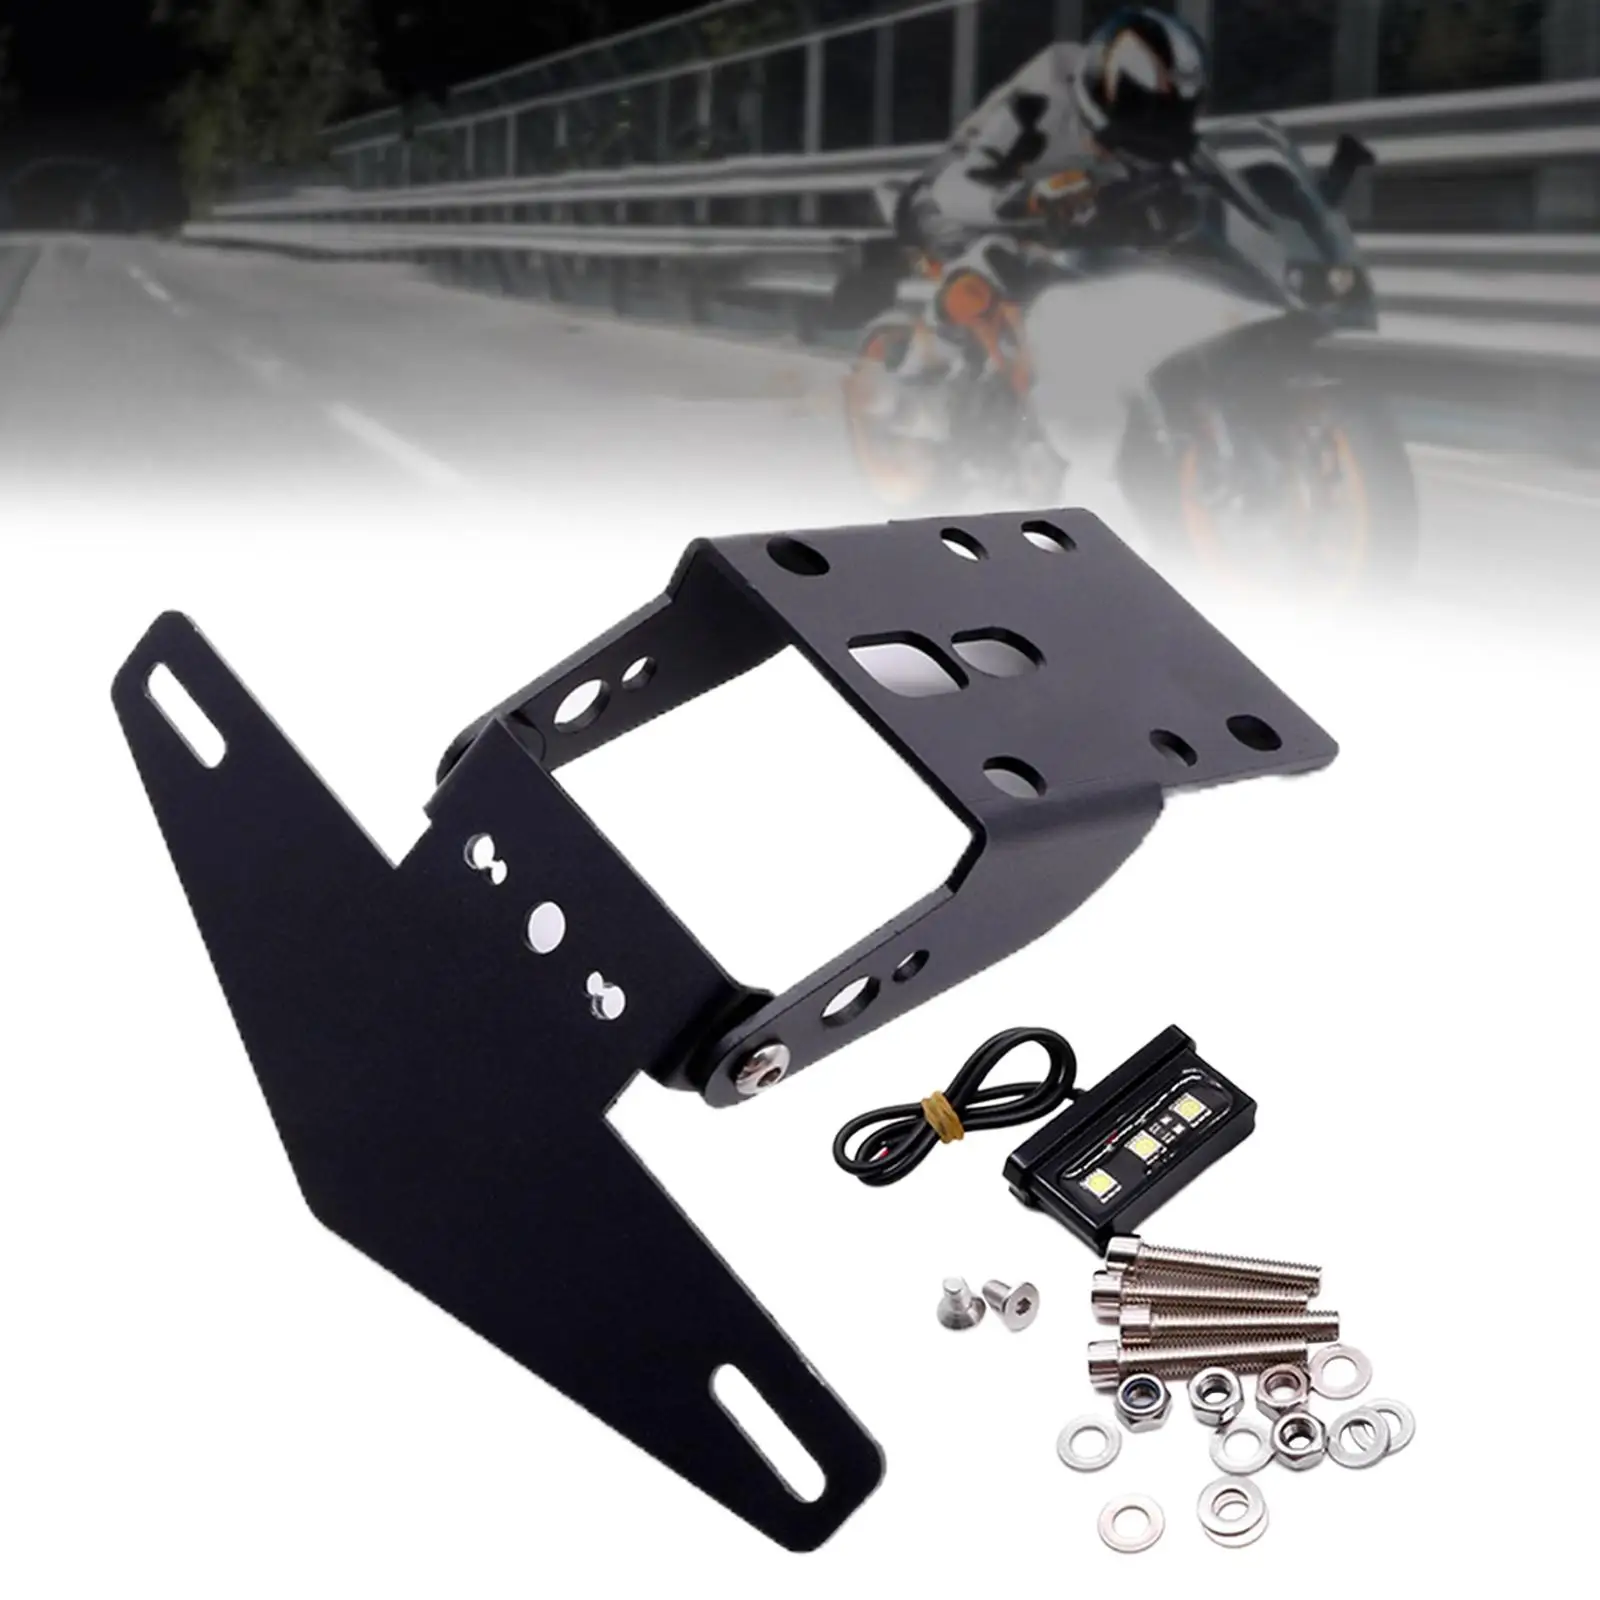 License Number Plate Holder Tail Tidy Adjustable Angle Rear Frame Bracket for 125 200 250 390 2017-2021 with LED Light Parts